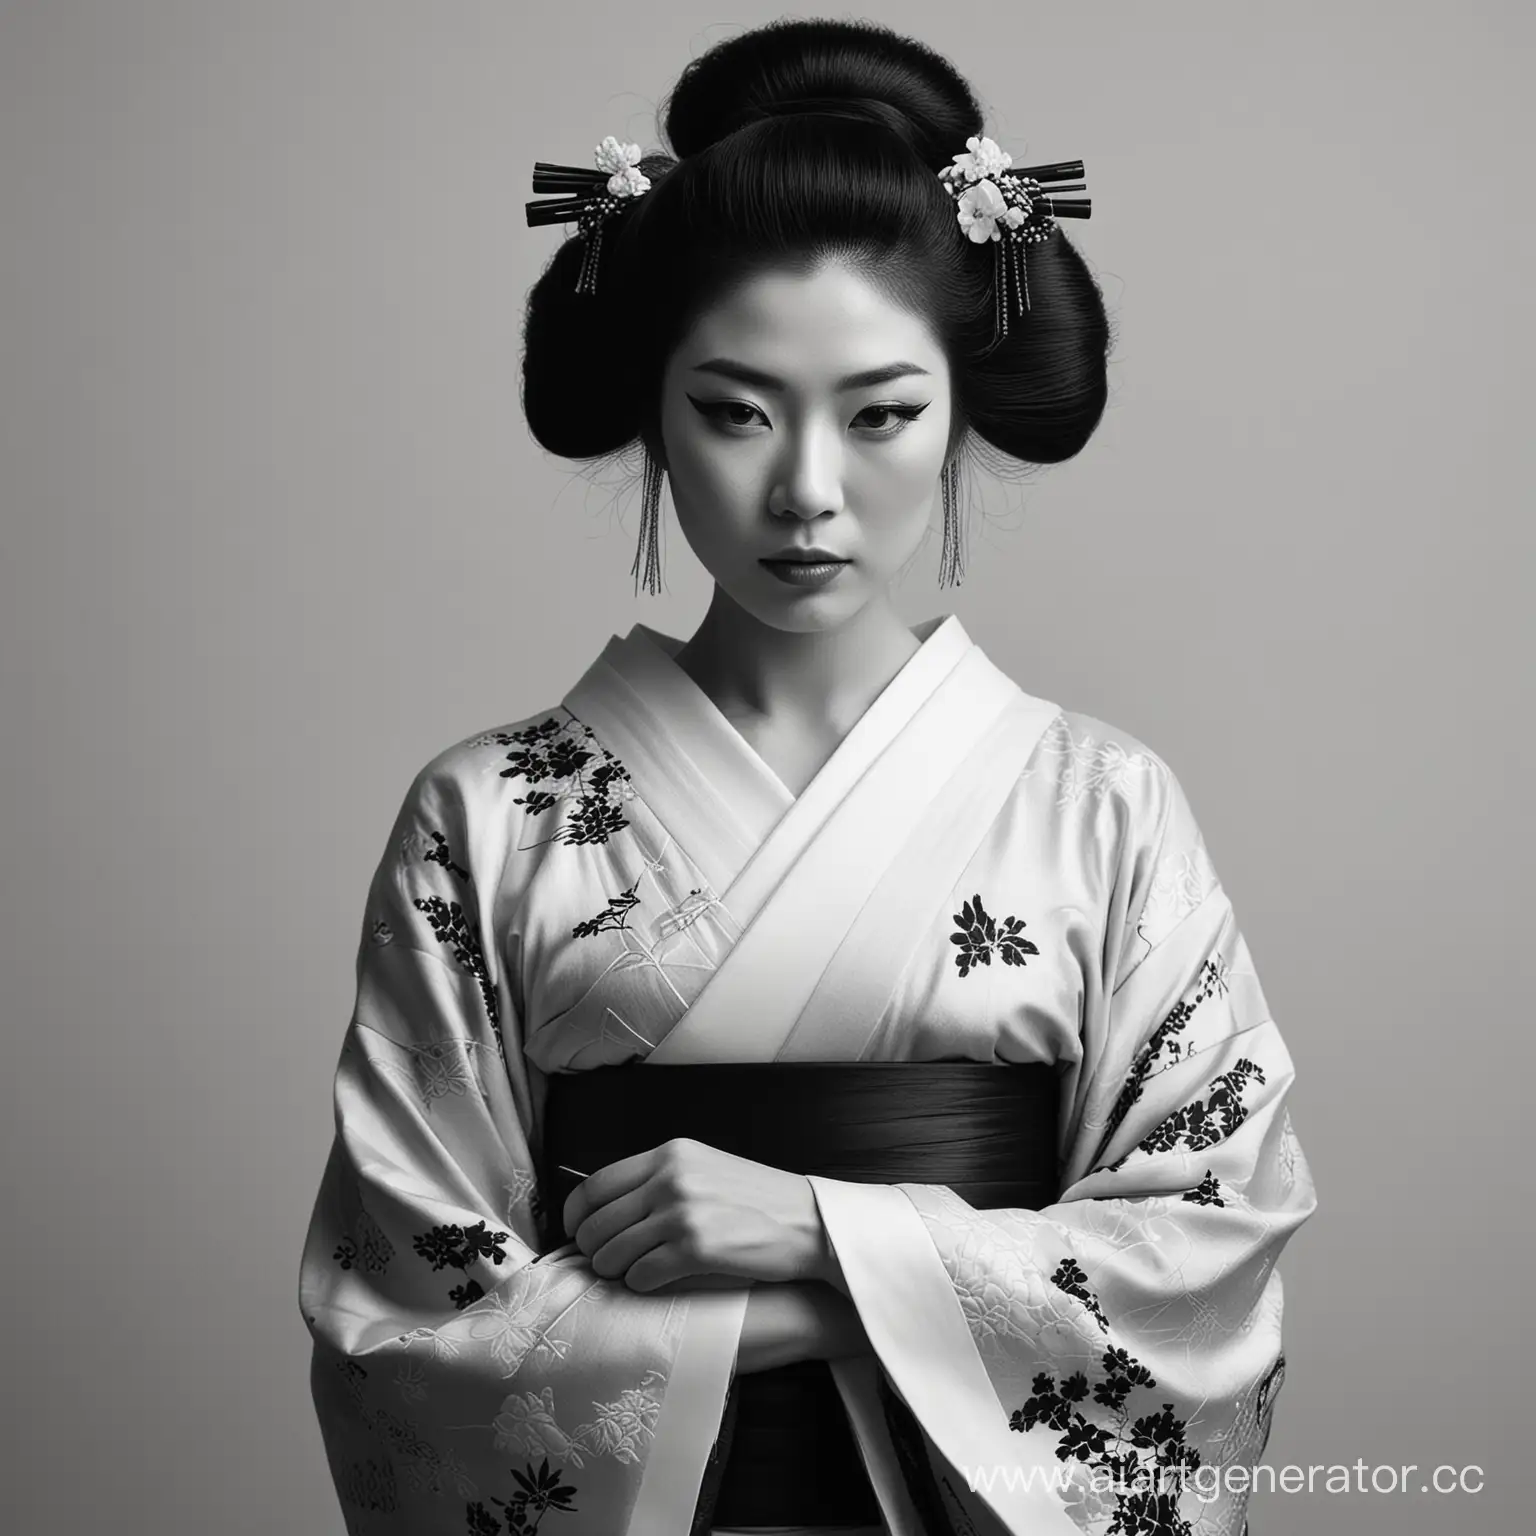 A geisha embodies an aesthetic in monochrome, with stark contrasts and sleek lines